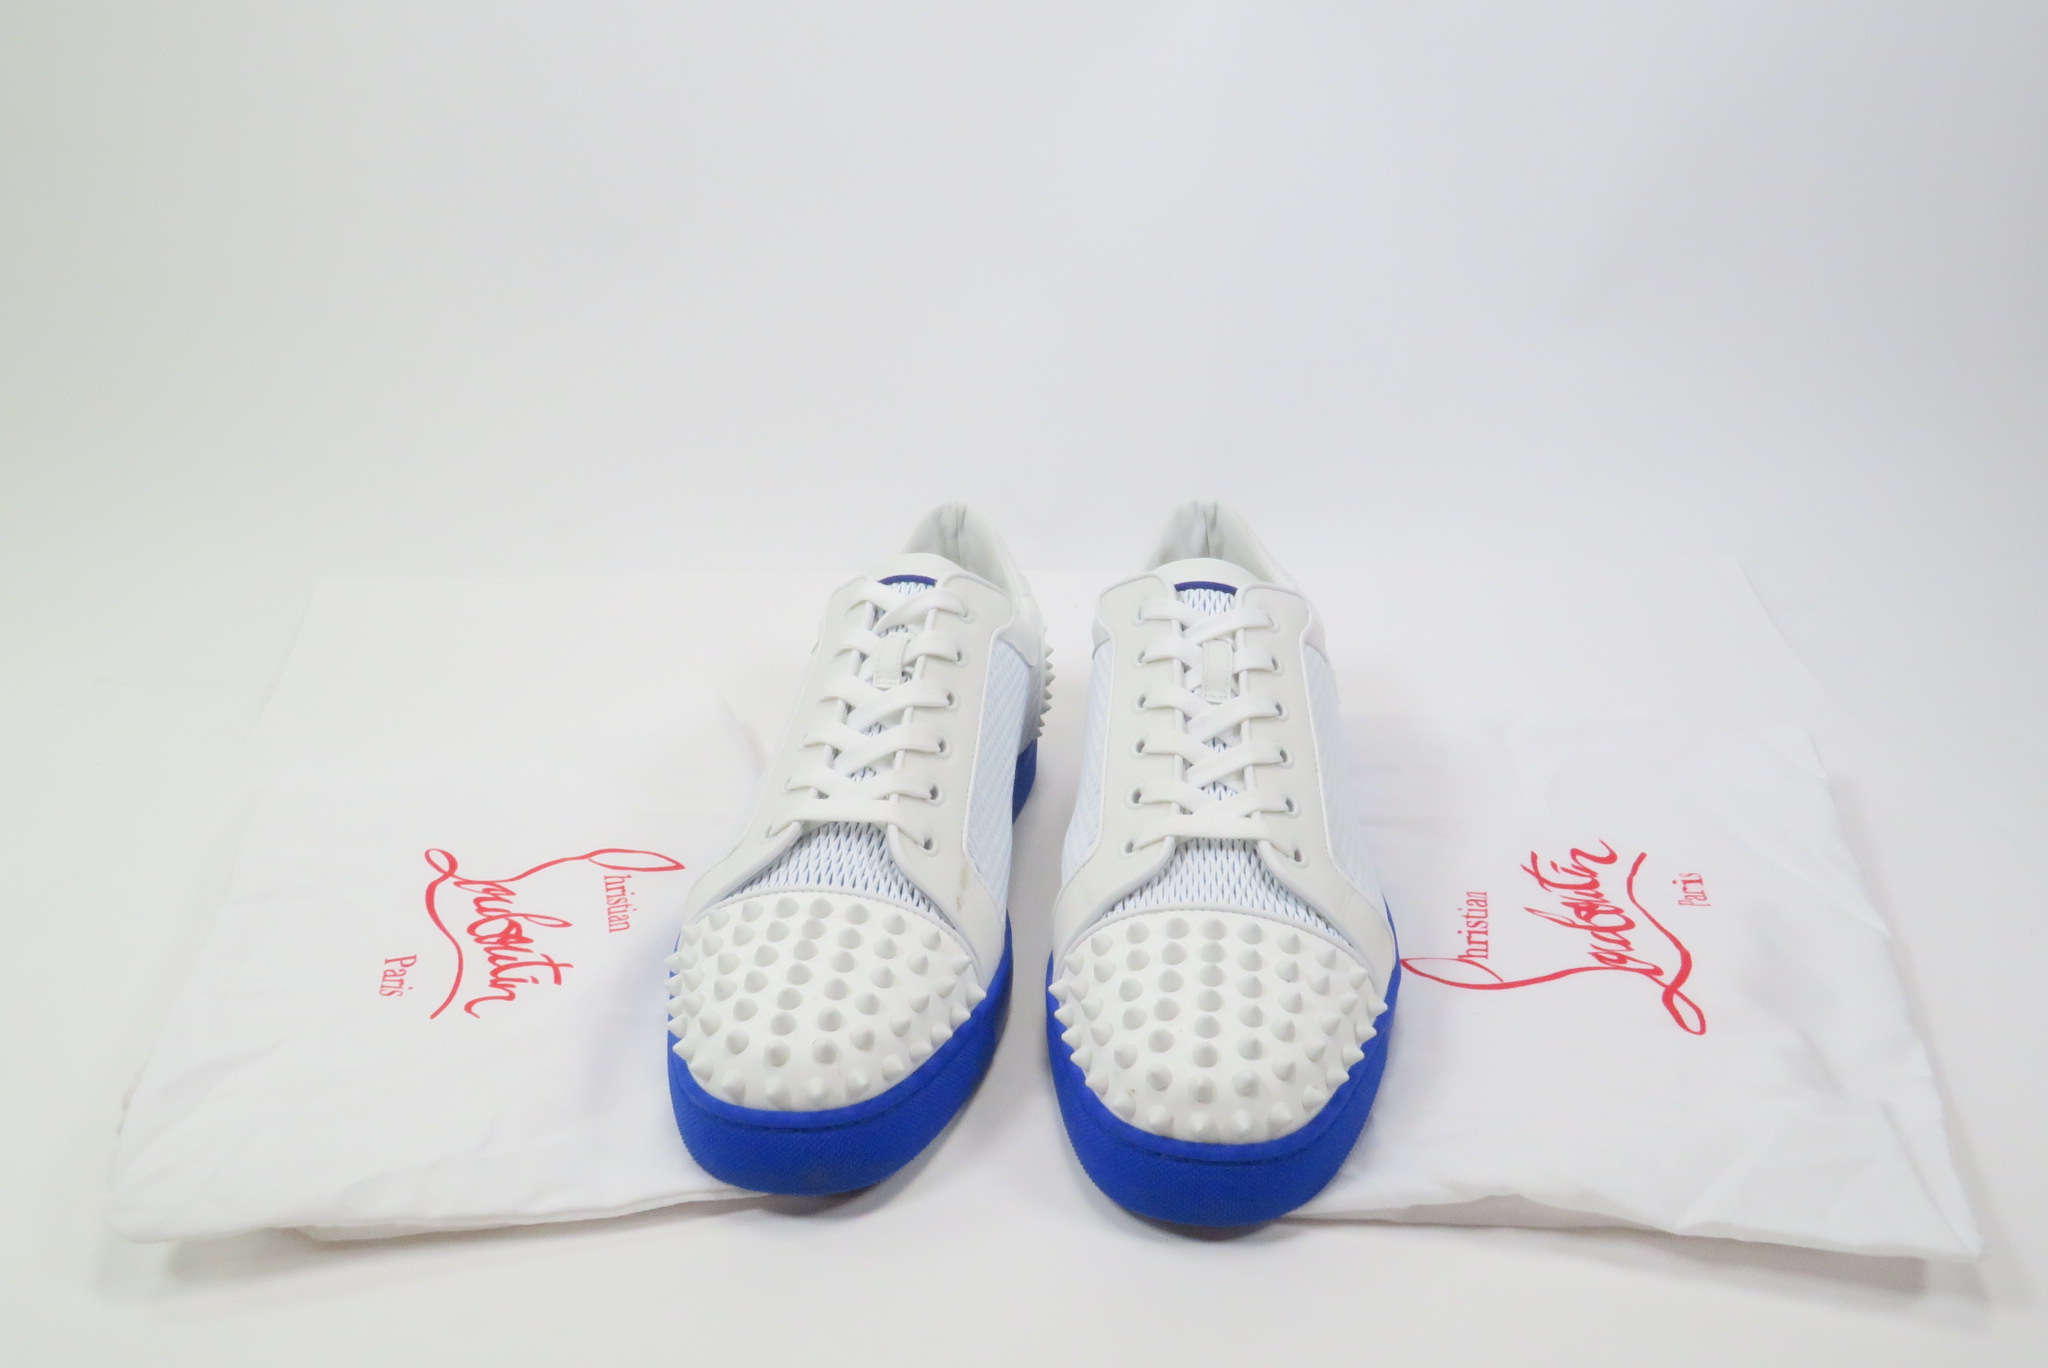 Christian Louboutin Seavaste 2 Spiked Leather Low-top Trainers in